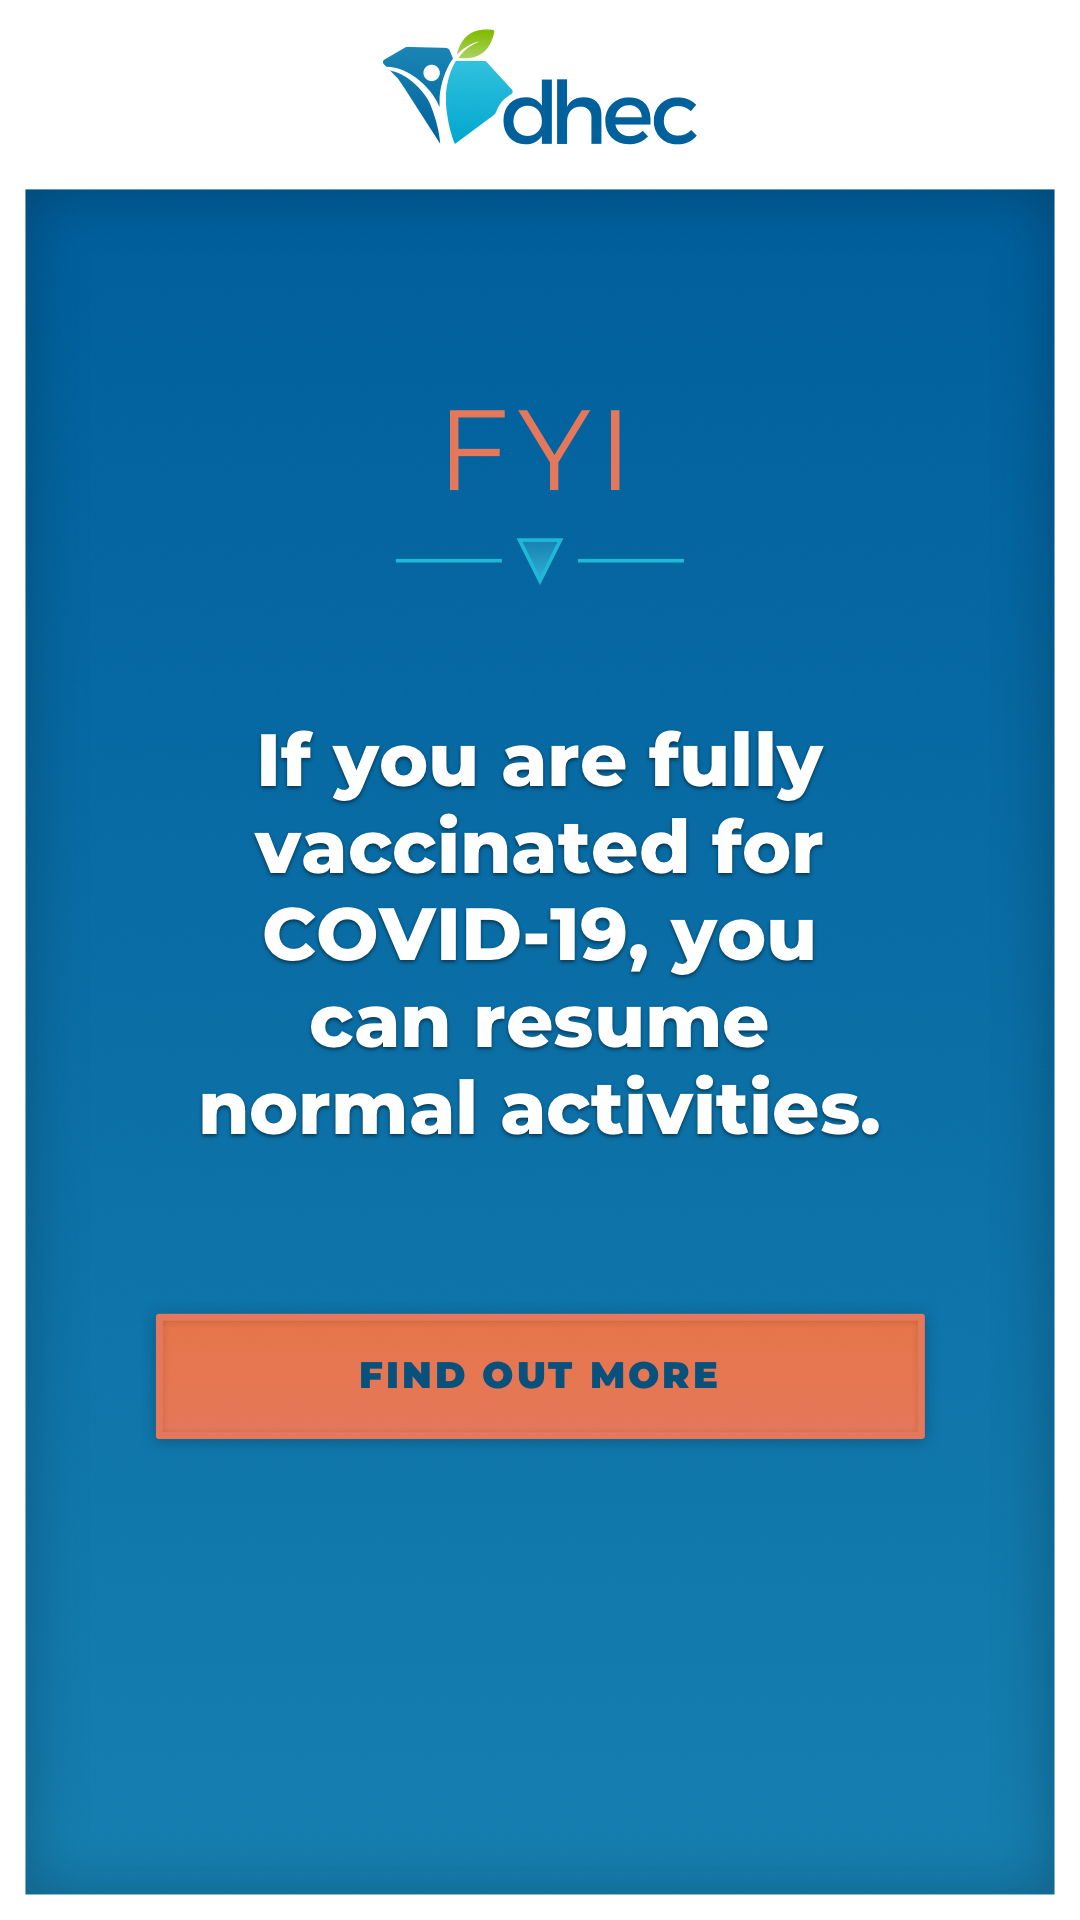 If you are fully vaccinated for COVID-19, you can resume normal activities.